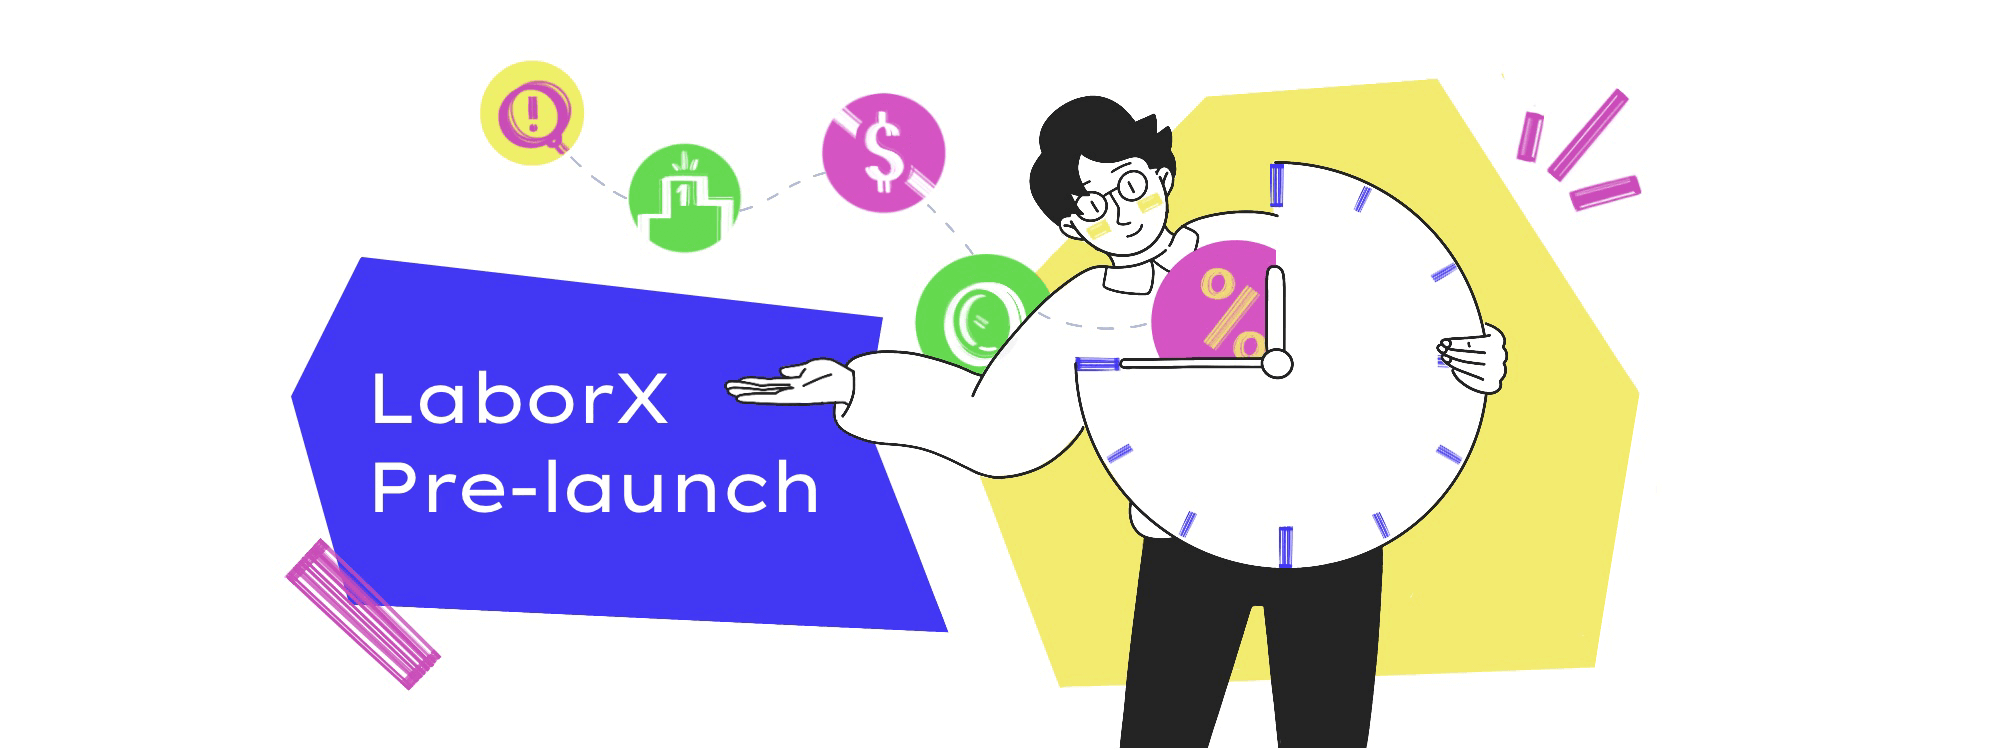 New LaborX marketplace pre-launch with TIME-holder benefits announced